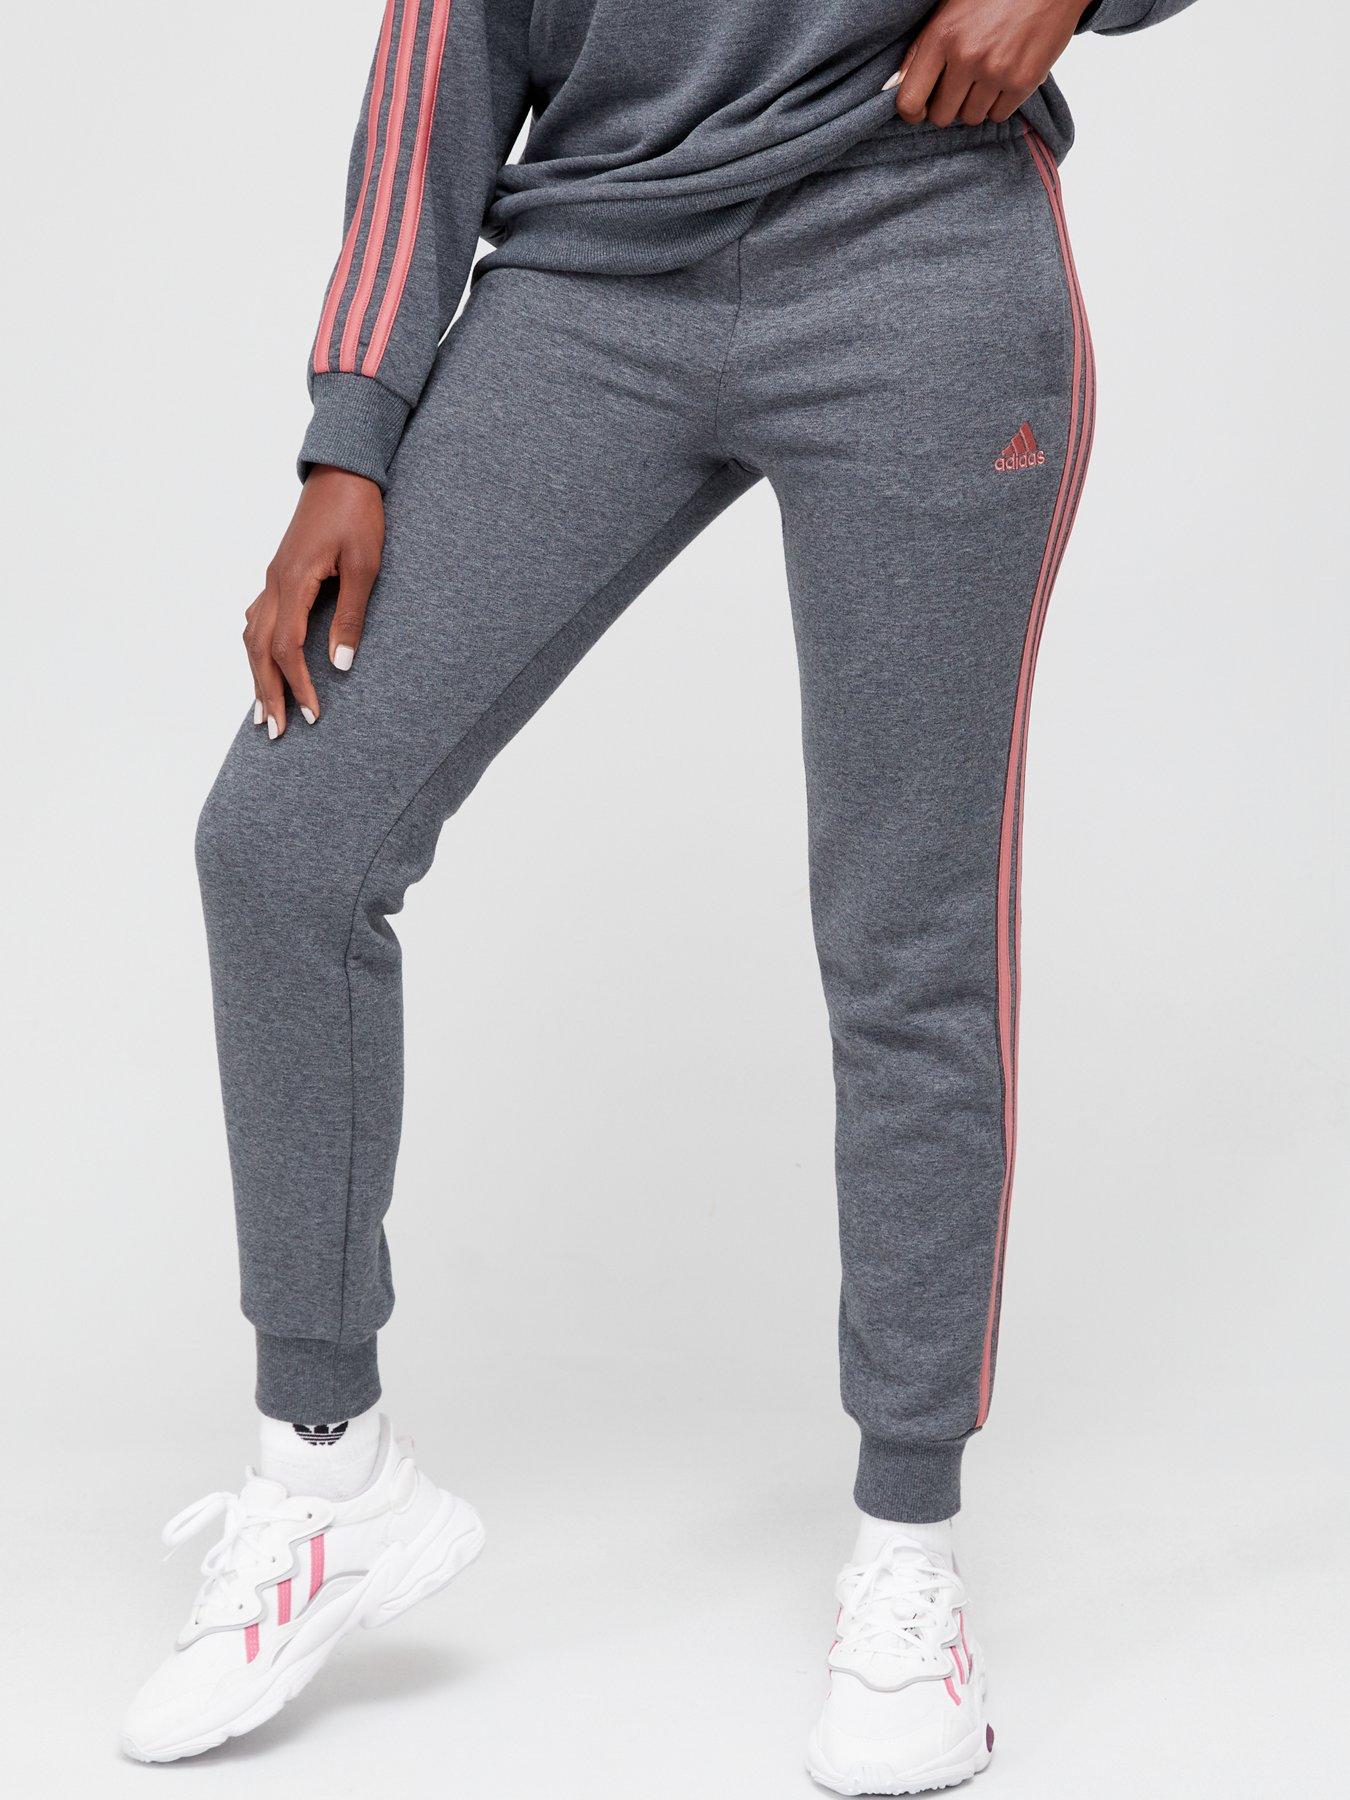 discount 83% Lifestyle tracksuit and joggers Black XS slim WOMEN FASHION Trousers Tracksuit and joggers Skinny 